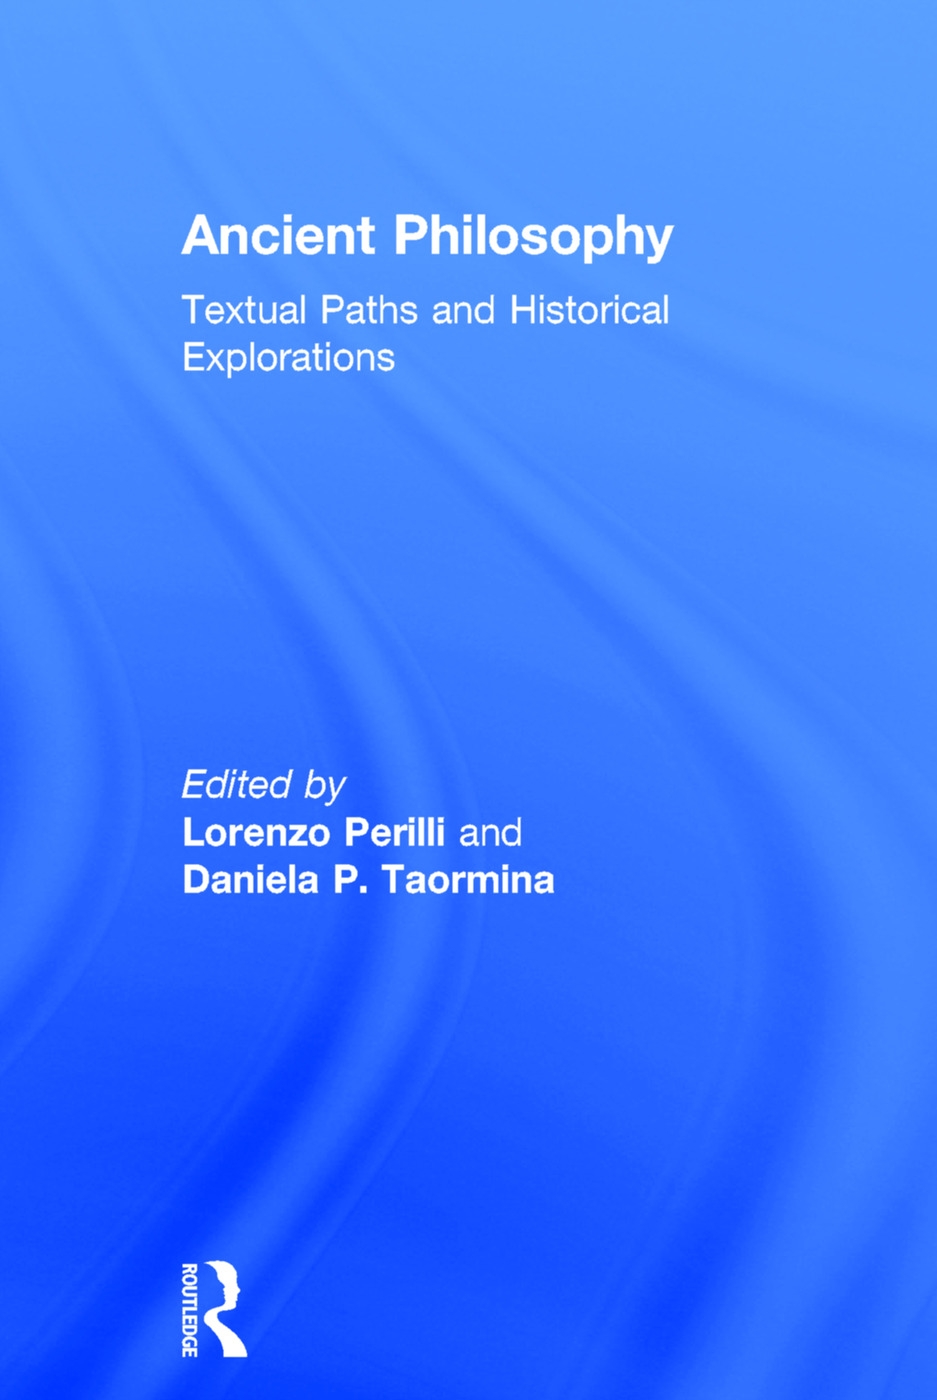 Ancient Philosophy: Textual Paths and Historical Explorations